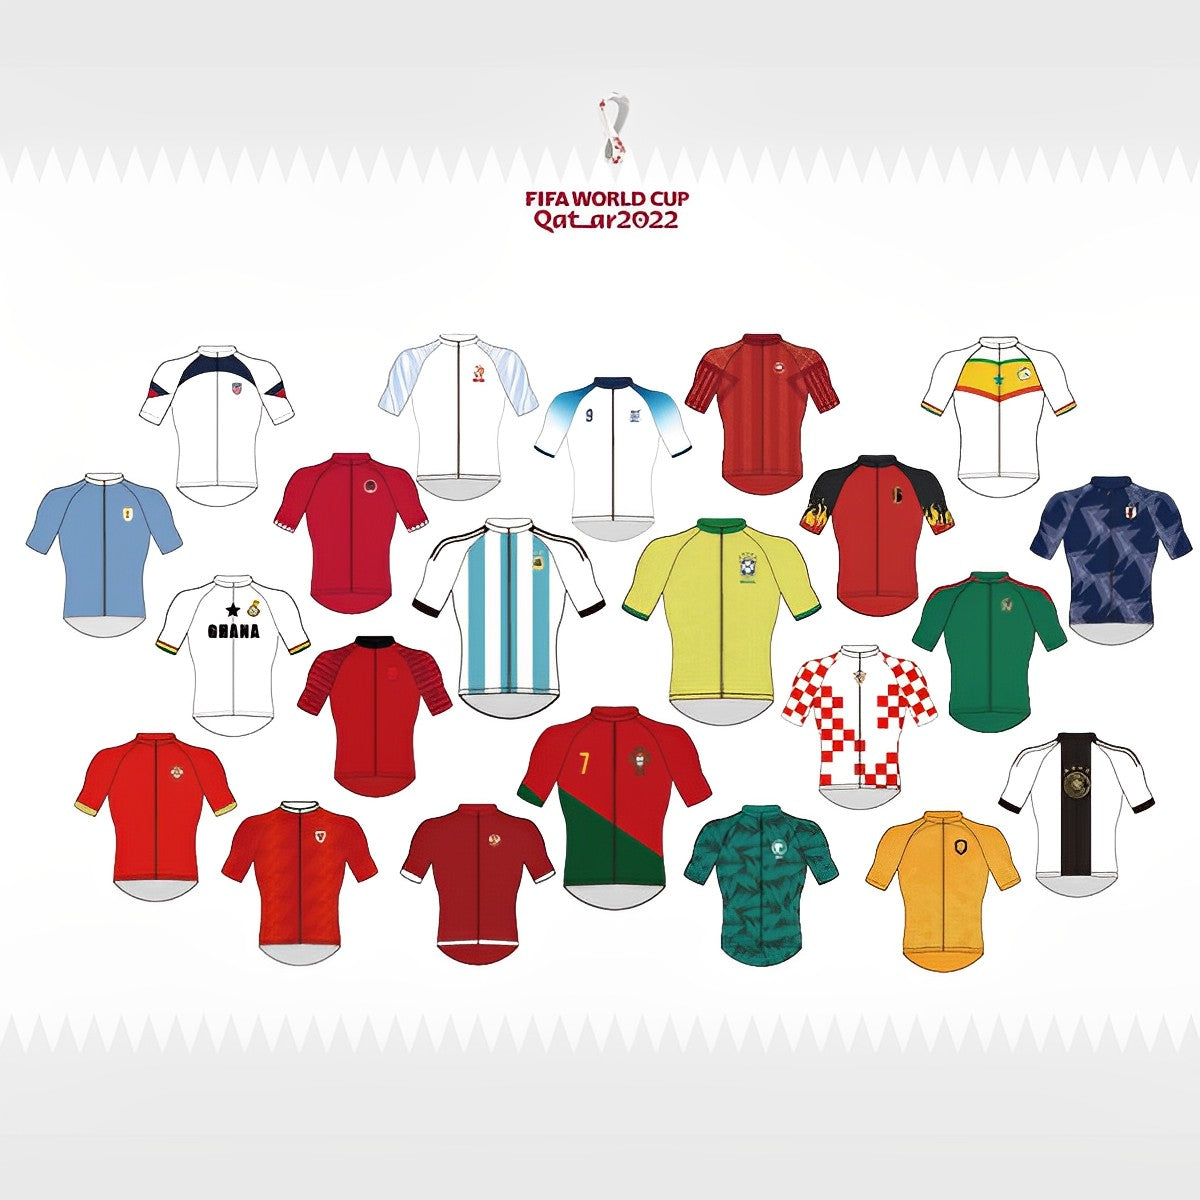 World Cup Design is Now Available on SOUKE Jersey!